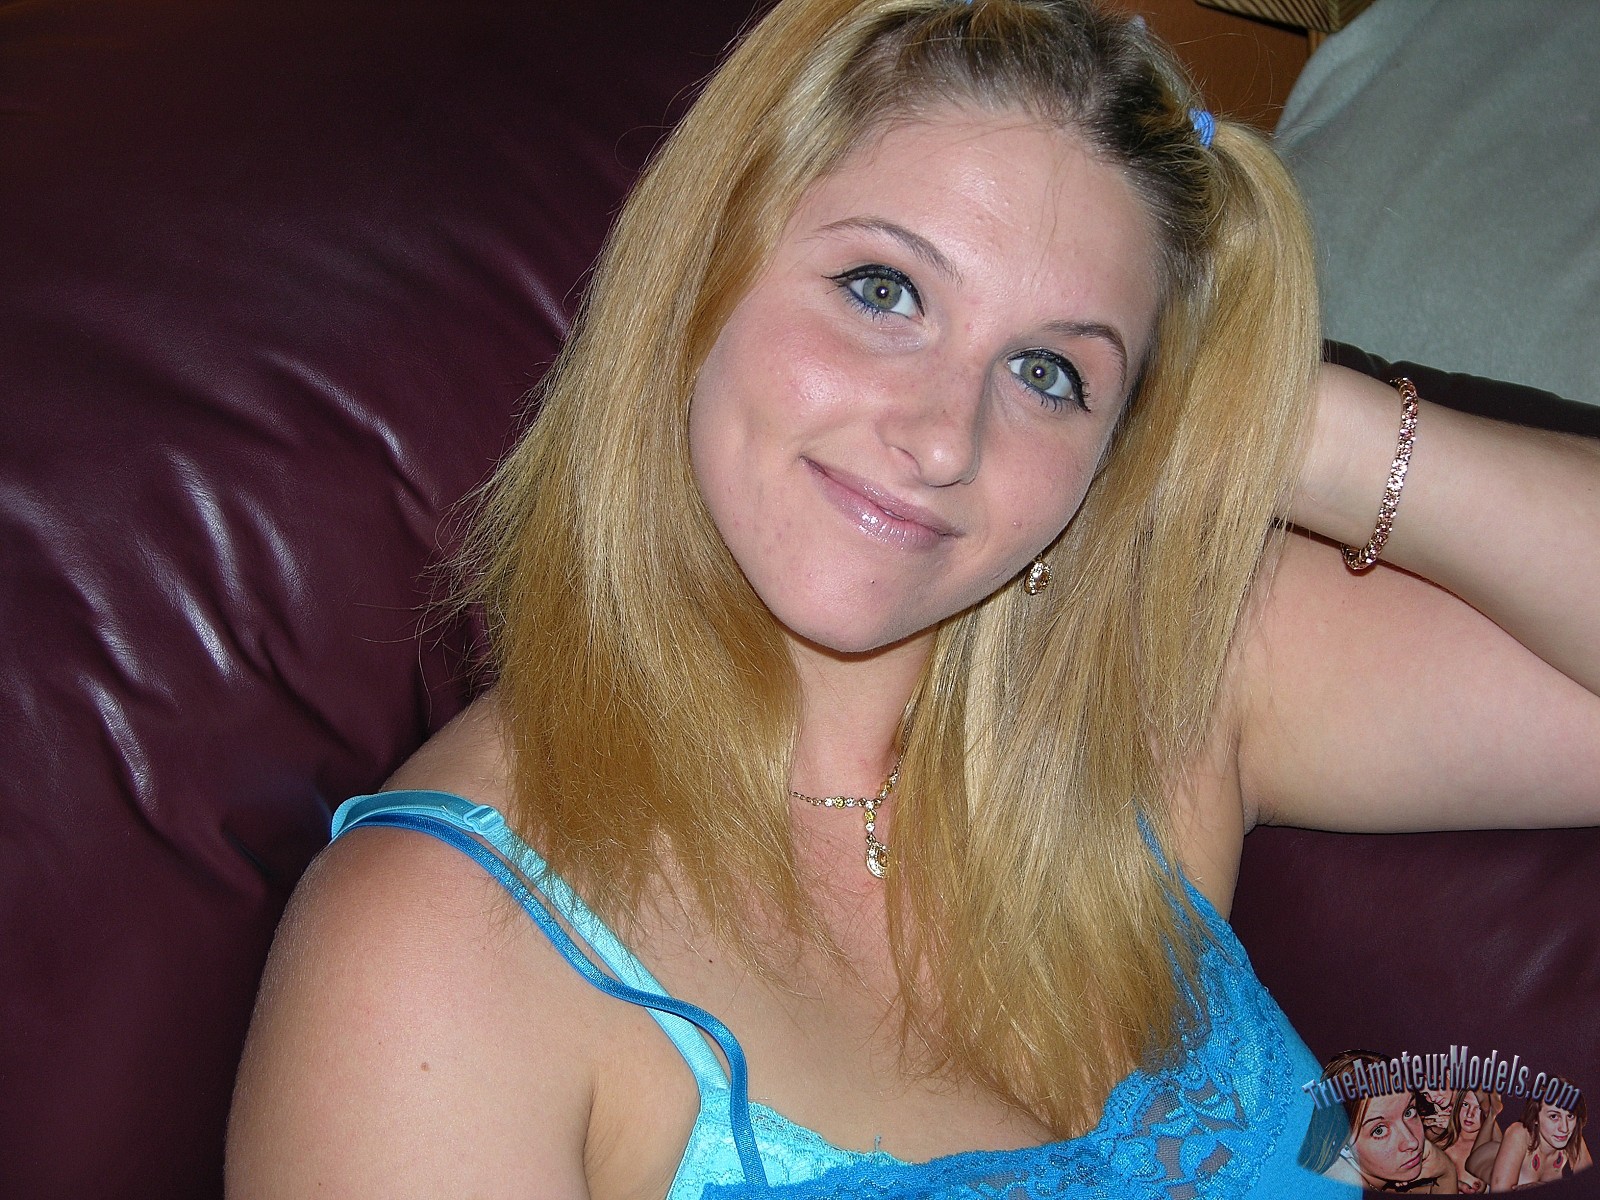 Big Breasted Blonde Amateur picture image